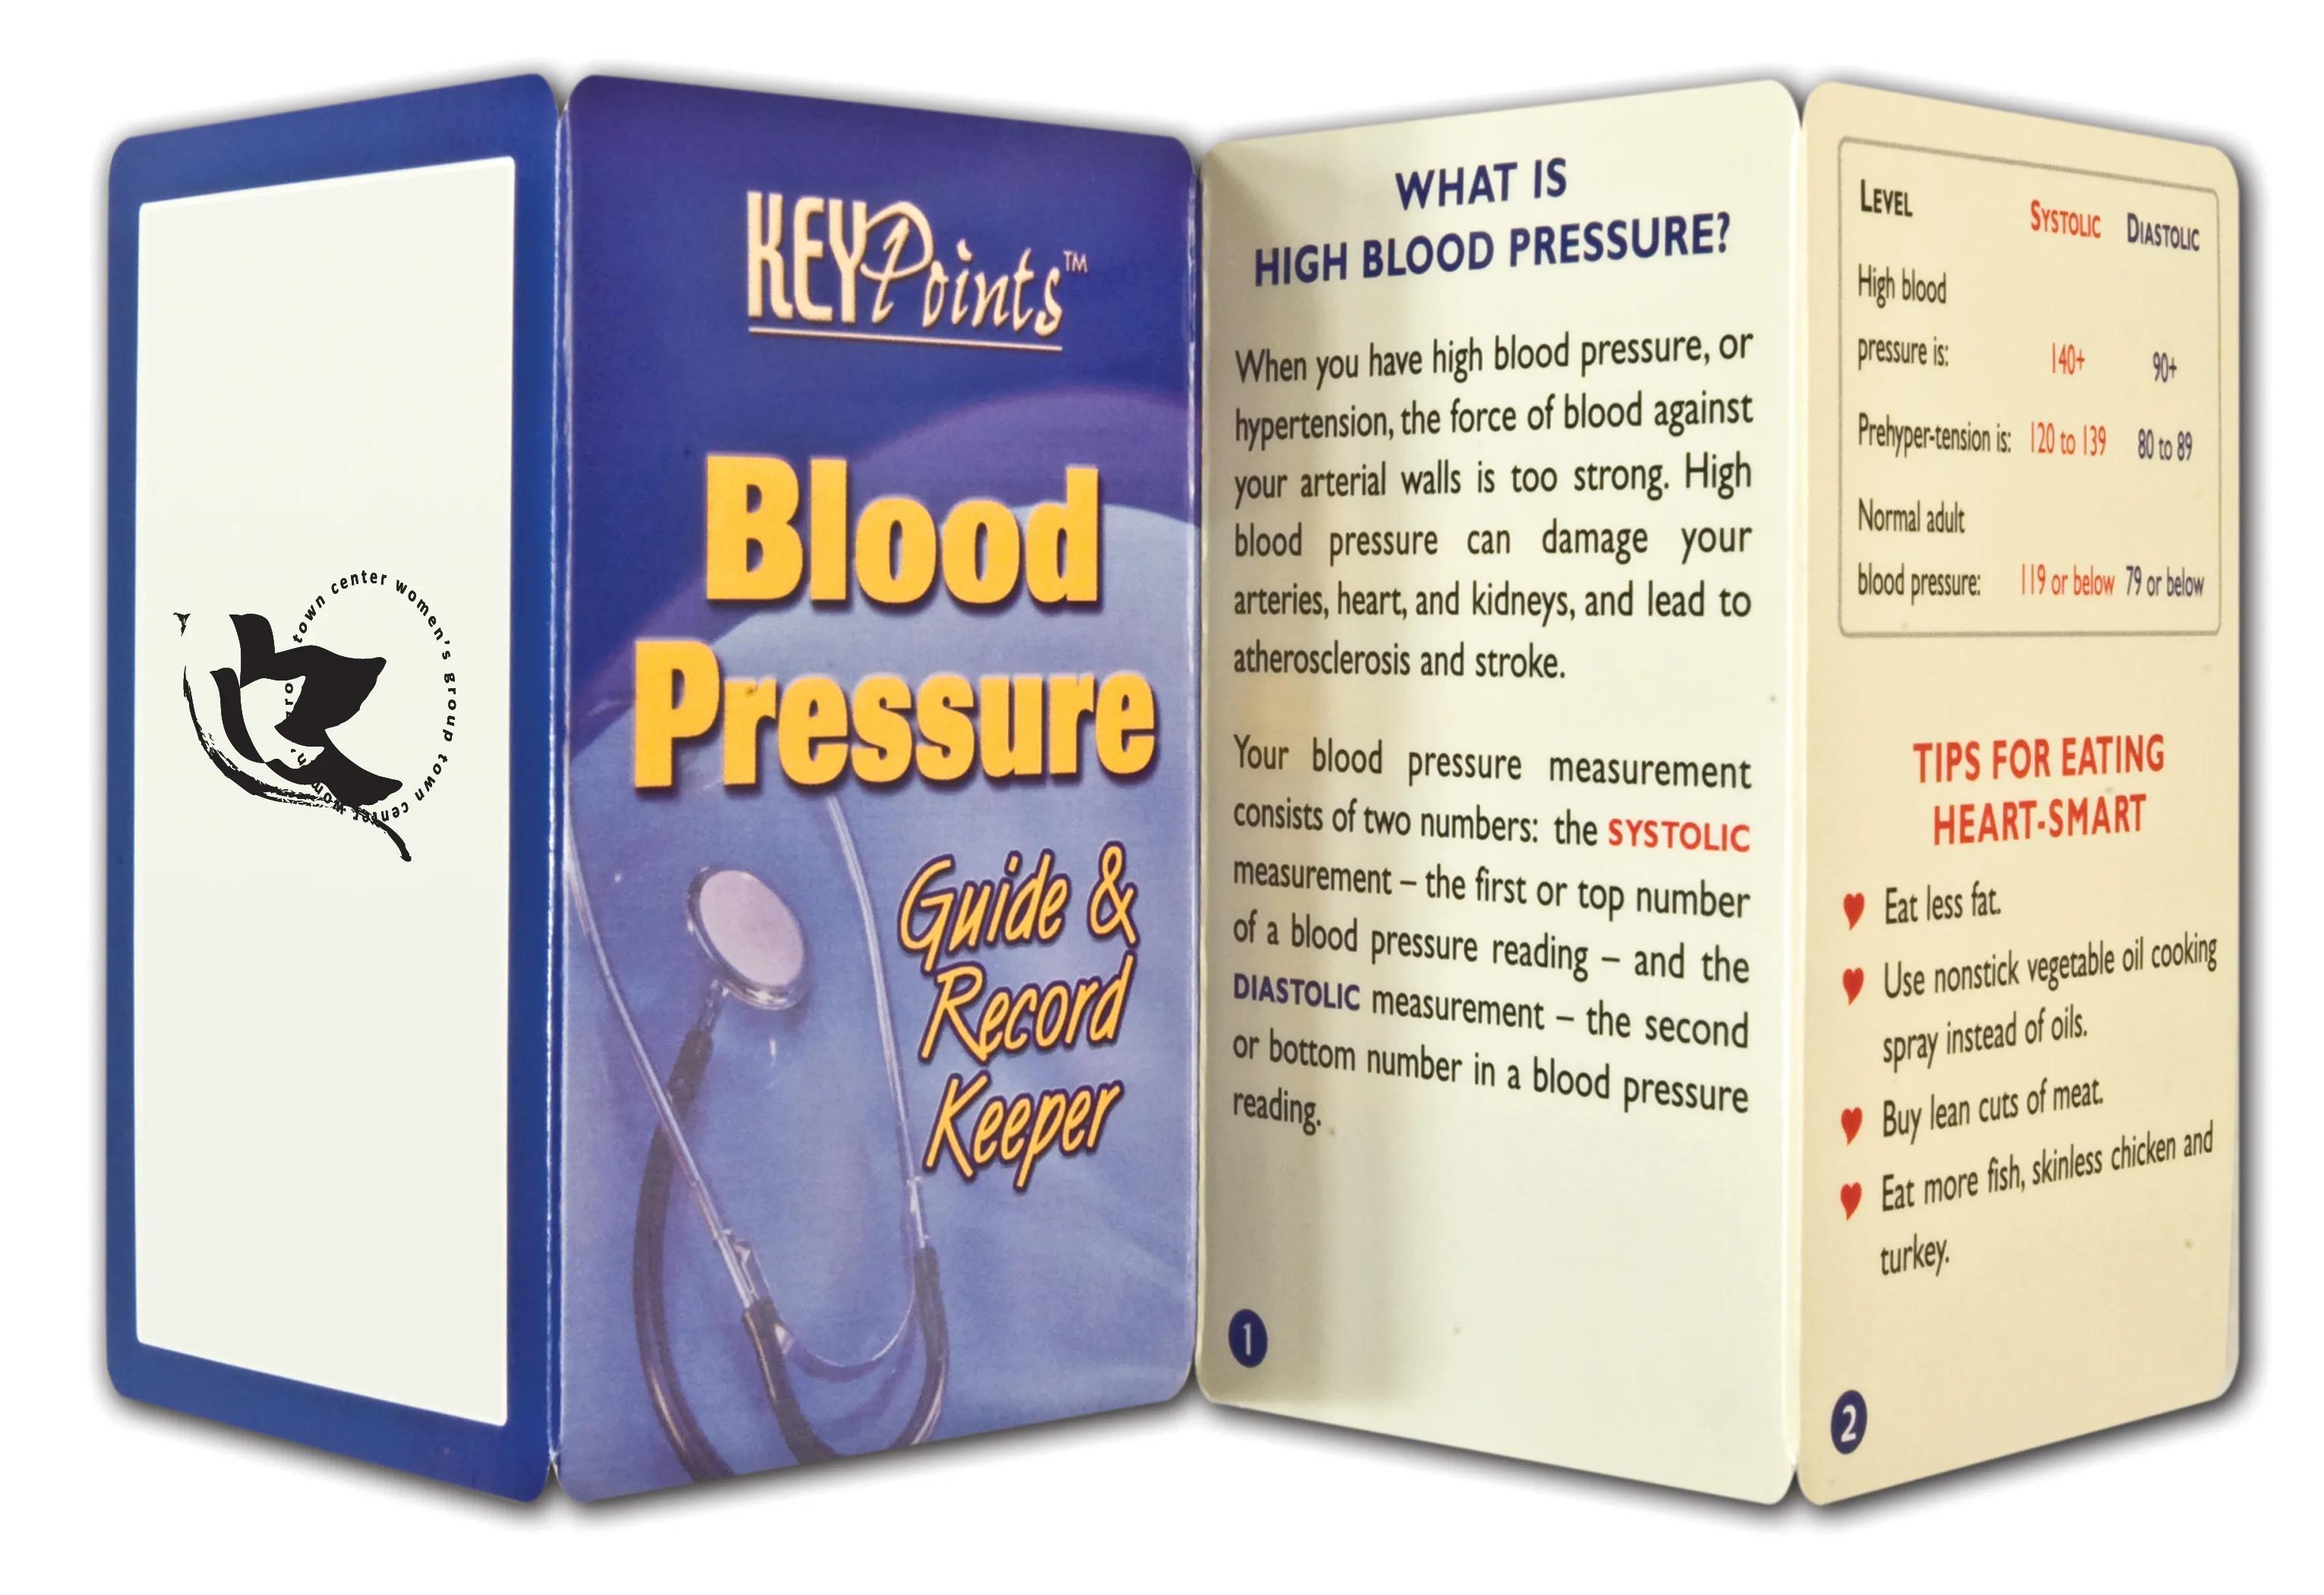 Key Point: Blood Pressure - Guide & Record Keeper 4 of 6